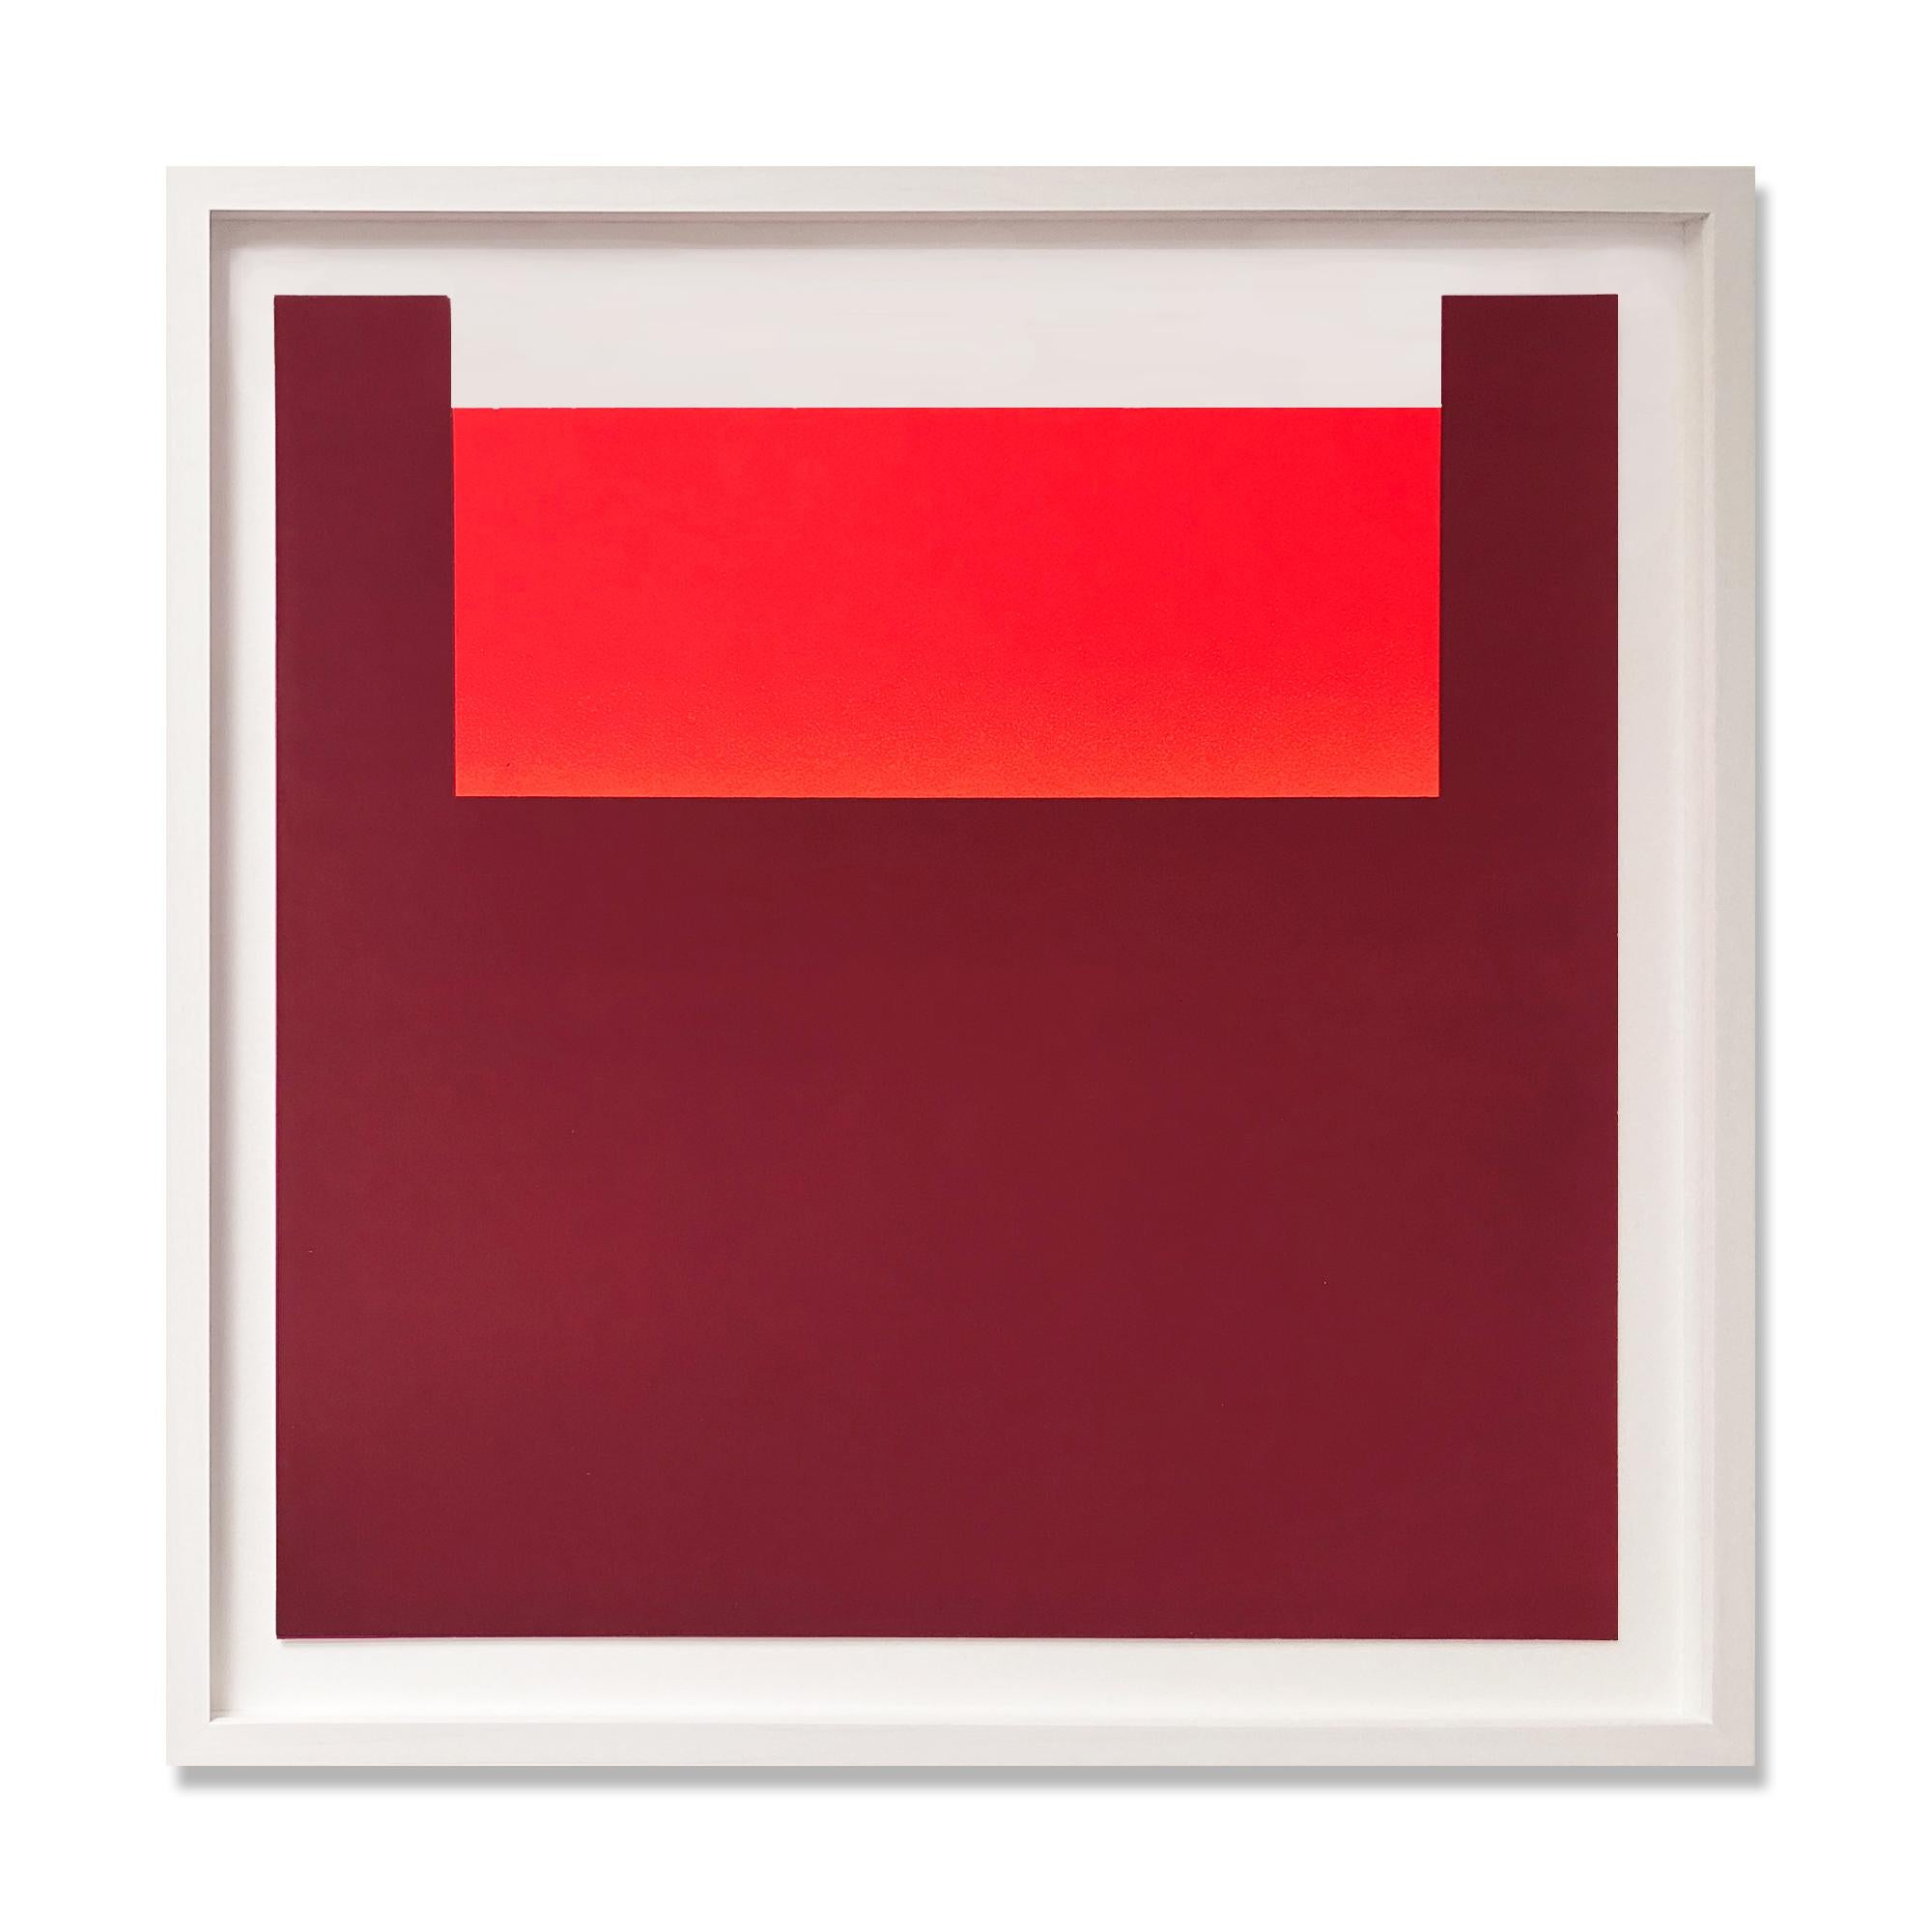 Rupprecht Geiger (1908 – Munich – 2009)
Warm Reds (No. 11 from all die roten farben), 1981
Medium: Serigraph on 270g  cardboard
Dimensions: 39.5 x 40 cm
Frame dimensions: 46.1 x 46.6 cm
Edition of 100 + XX: Hand signed in pencil, verso
Publisher: